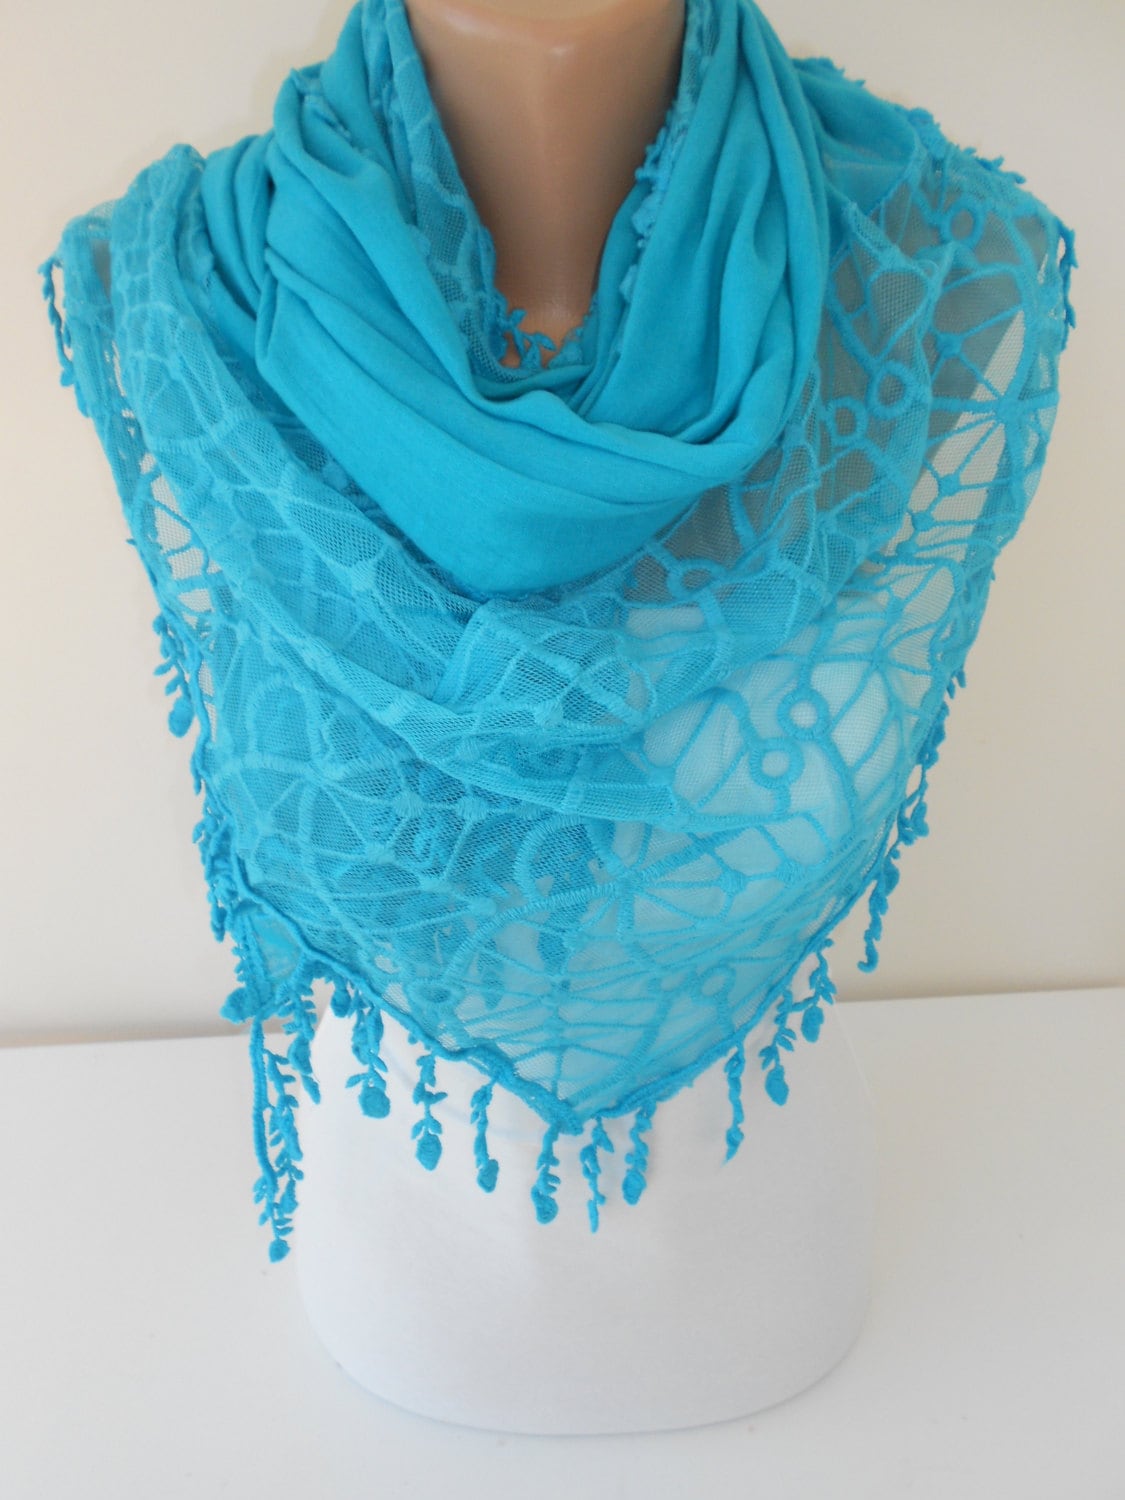 Valentines Gift For Her Blue Tulle Scarf Shawl Cotton by ScarfClub